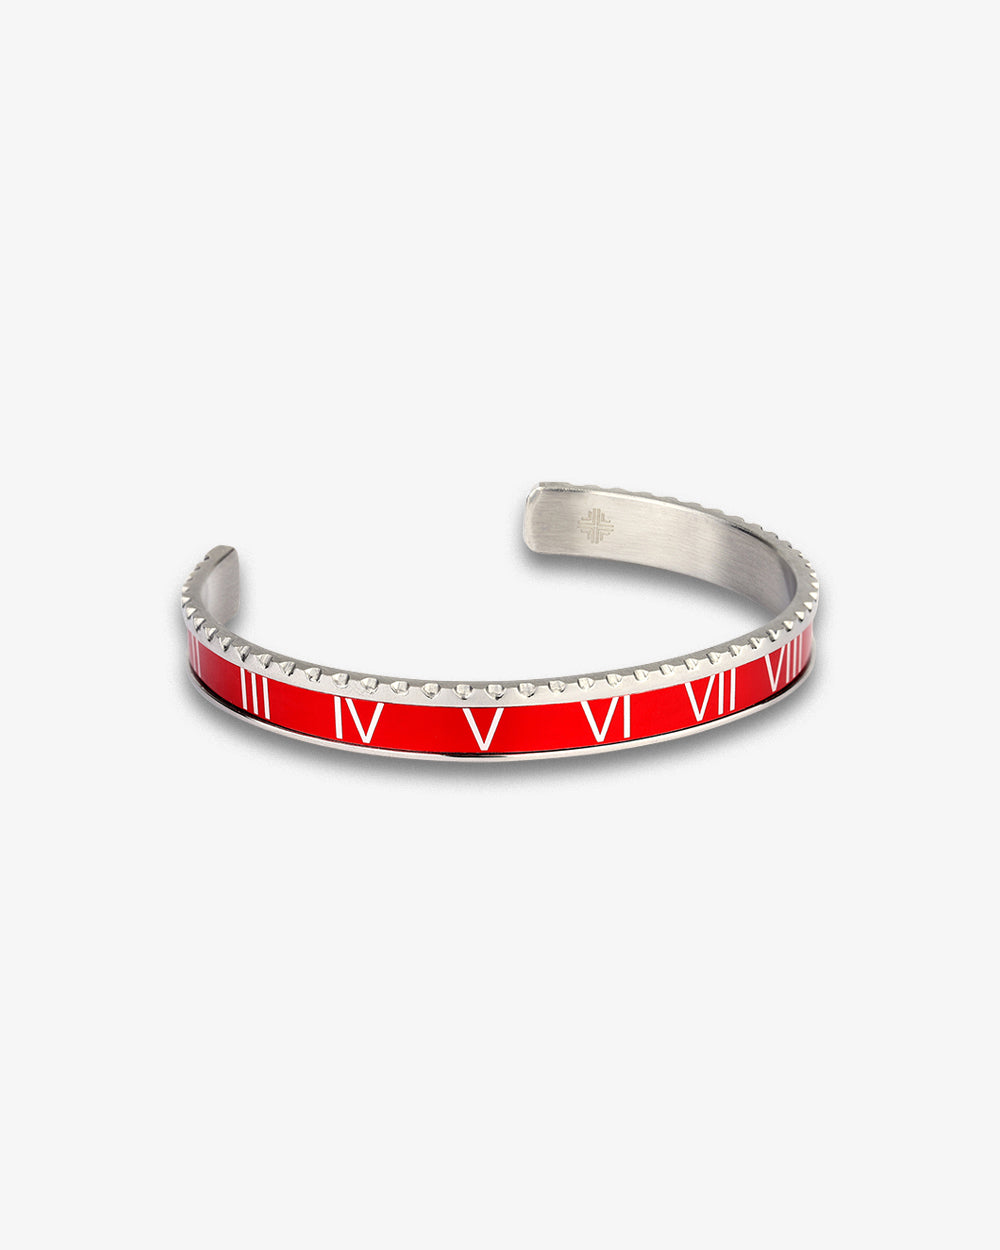 Swiss Concept Classic Roman Numeral Speed Bracelet (Red & Stainless Steel) - Polished Finish